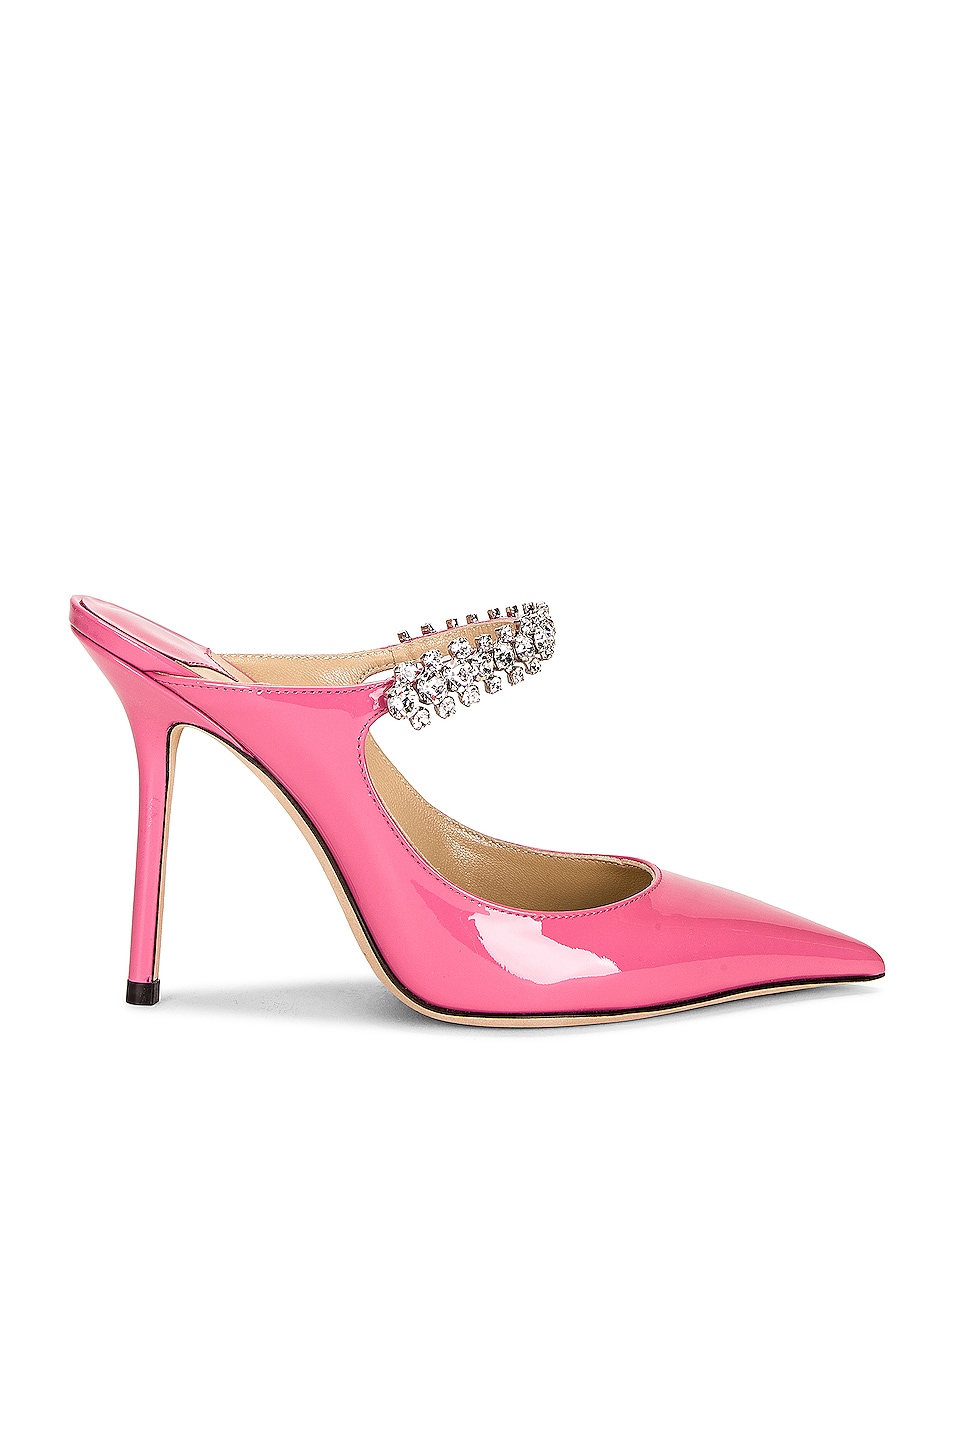 Jimmy Choo Bing 100 Patent Leather Mule in Candy Pink | FWRD